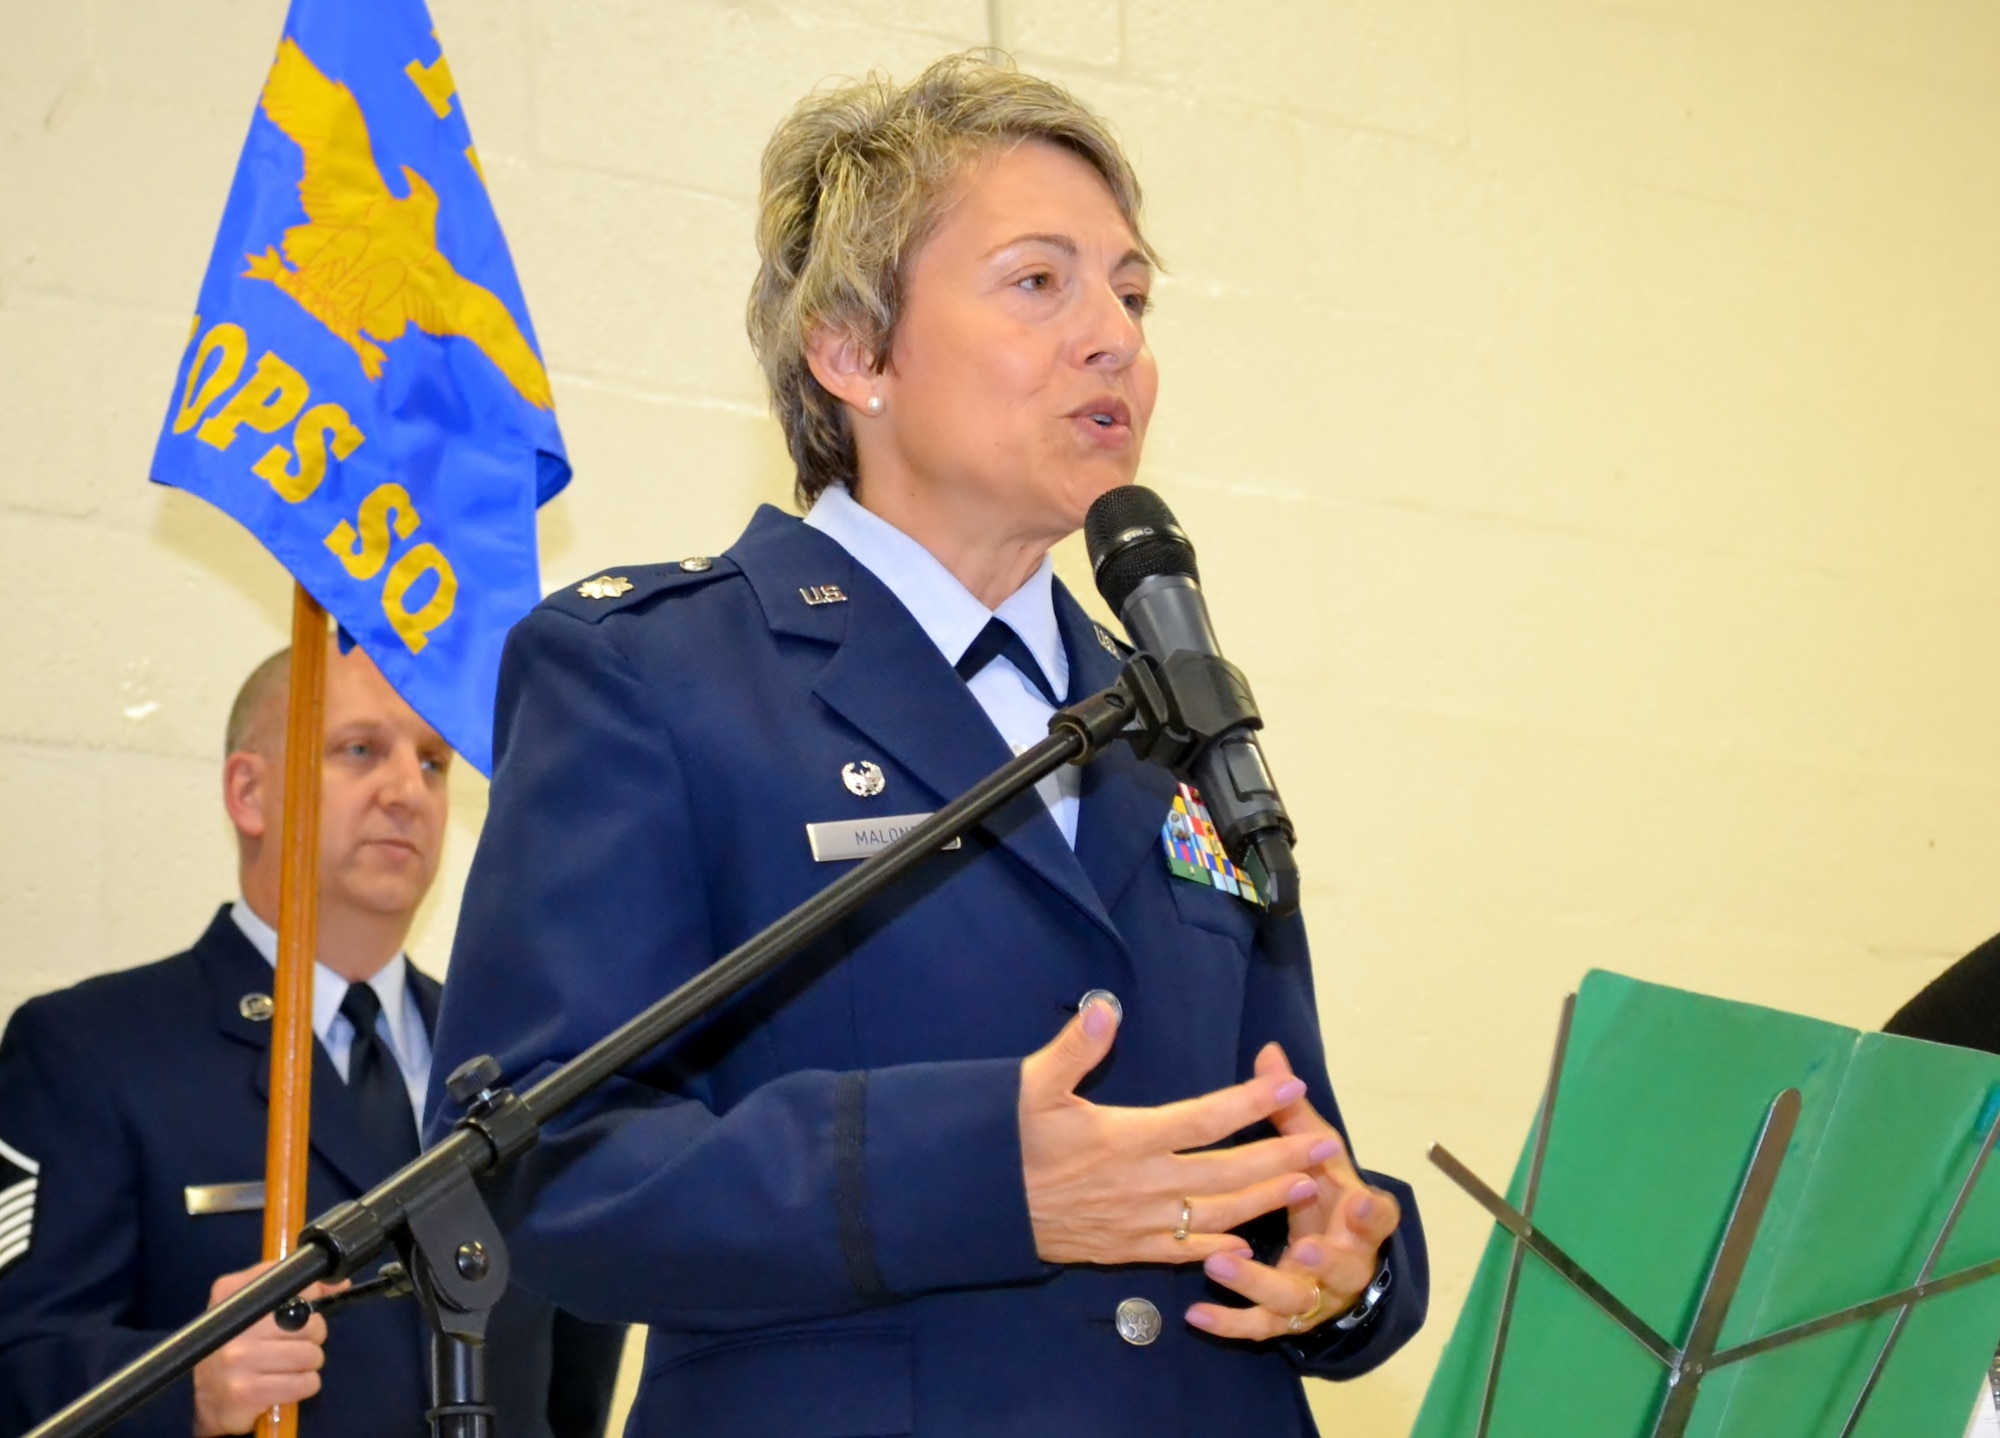 Newly-appointed 112th Cyberspace Operations Squadron Commander Lt. Col. Claudia Malone addresses the audience during her assumption of command held at the 111th Attack Wing headquarters building here Sept. 10, 2016. The 112th COS mission operates on both a state and federal front, providing cyber support for a multitude of platforms based upon the area of responsibility. (U.S. Air National Guard photo by Tech. Sgt. Andria Allmond)